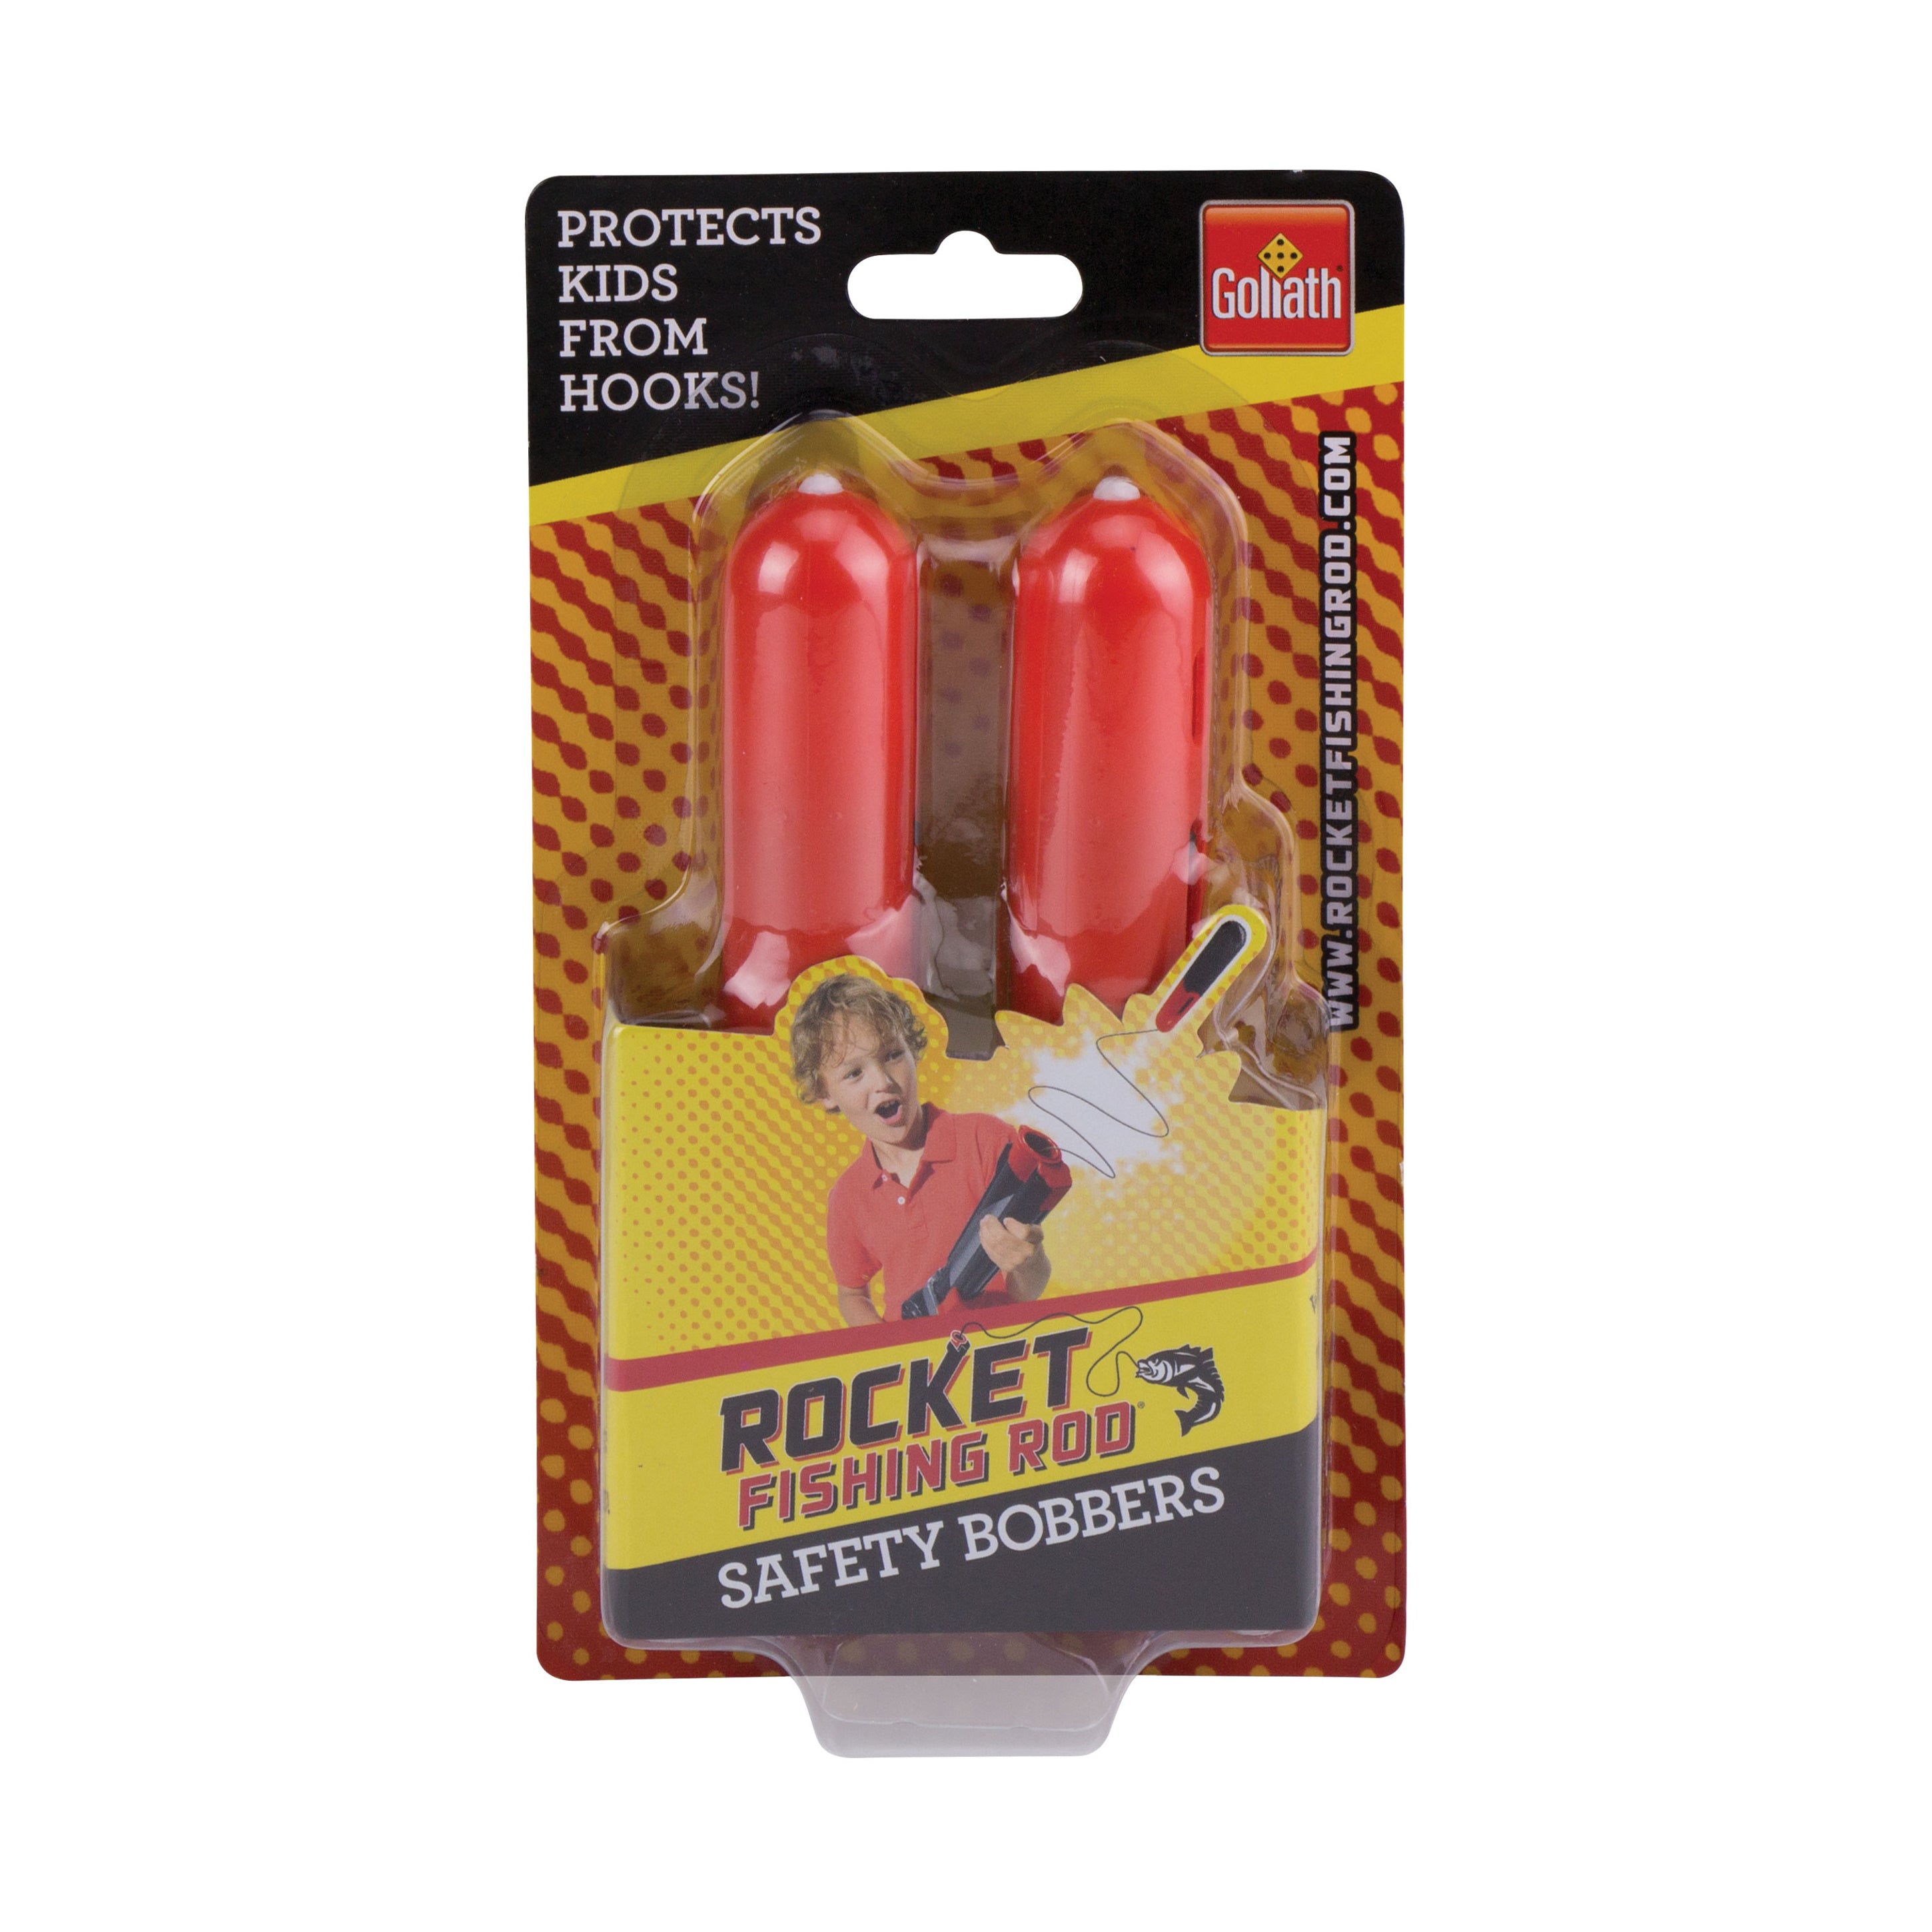 Rocket Fishing Rod Safety Bobbers, Active Play